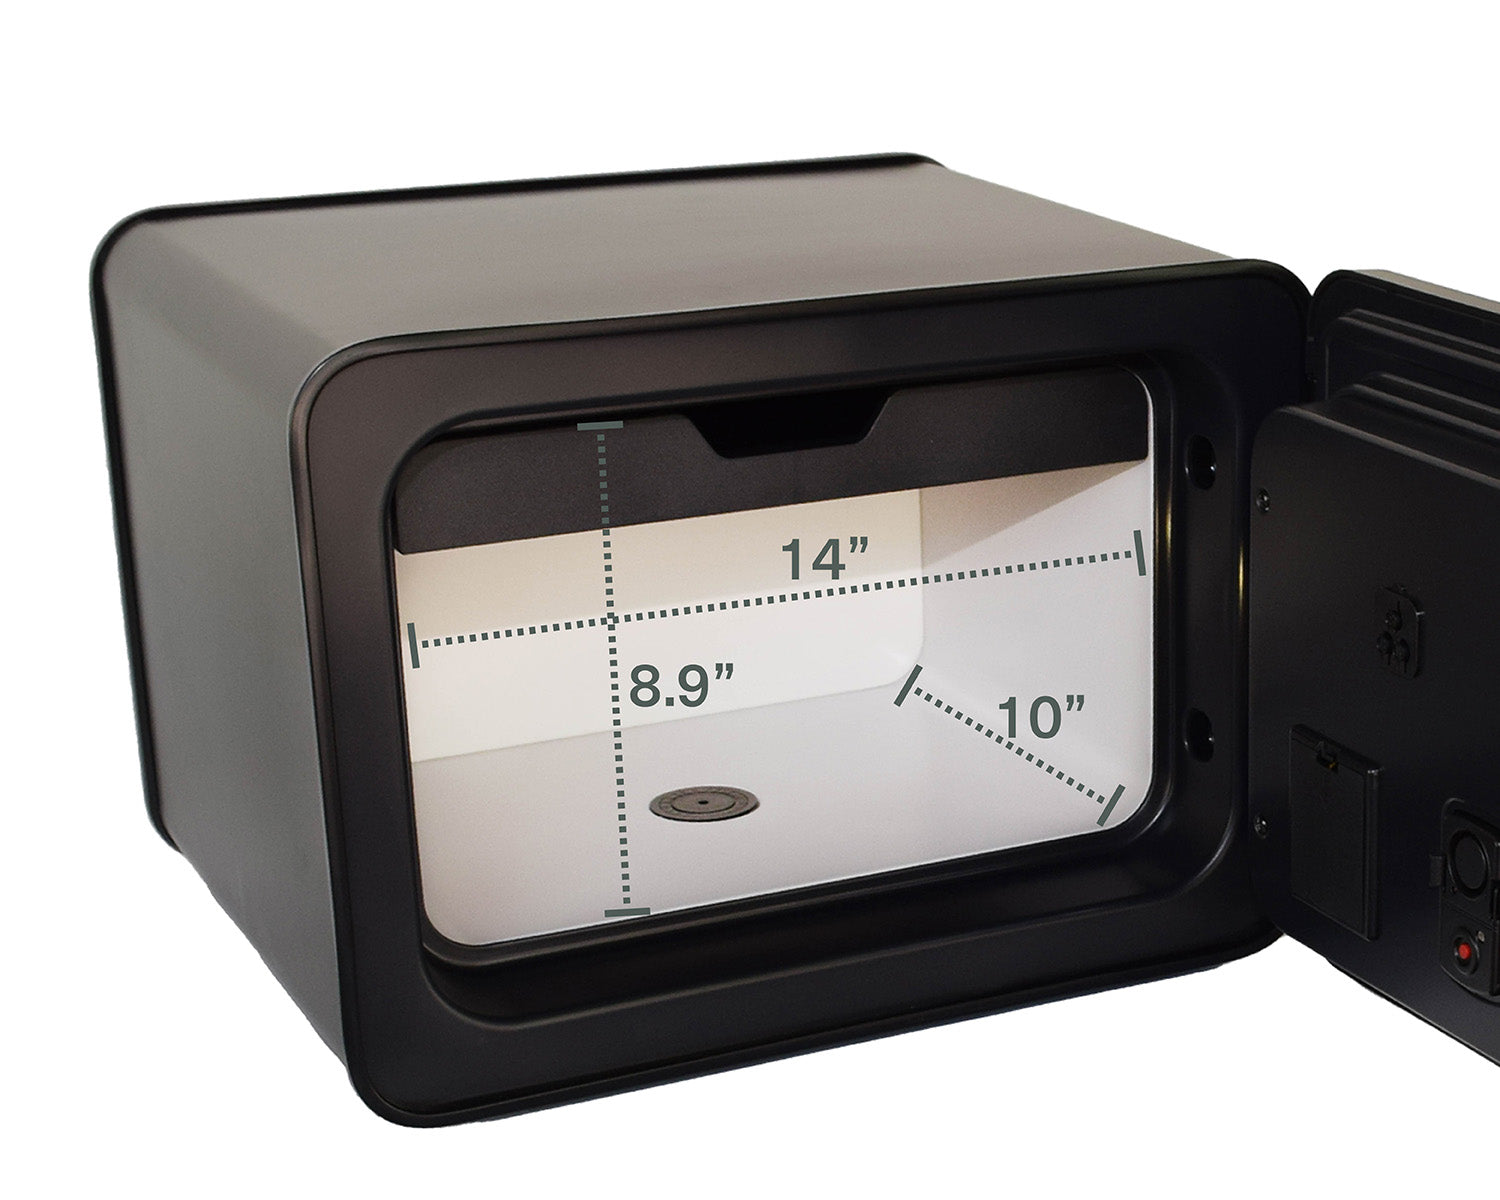 Photo of the interior of a Cocono 20 small safe for home showing dimensions: 14" x 8.9" x 10"